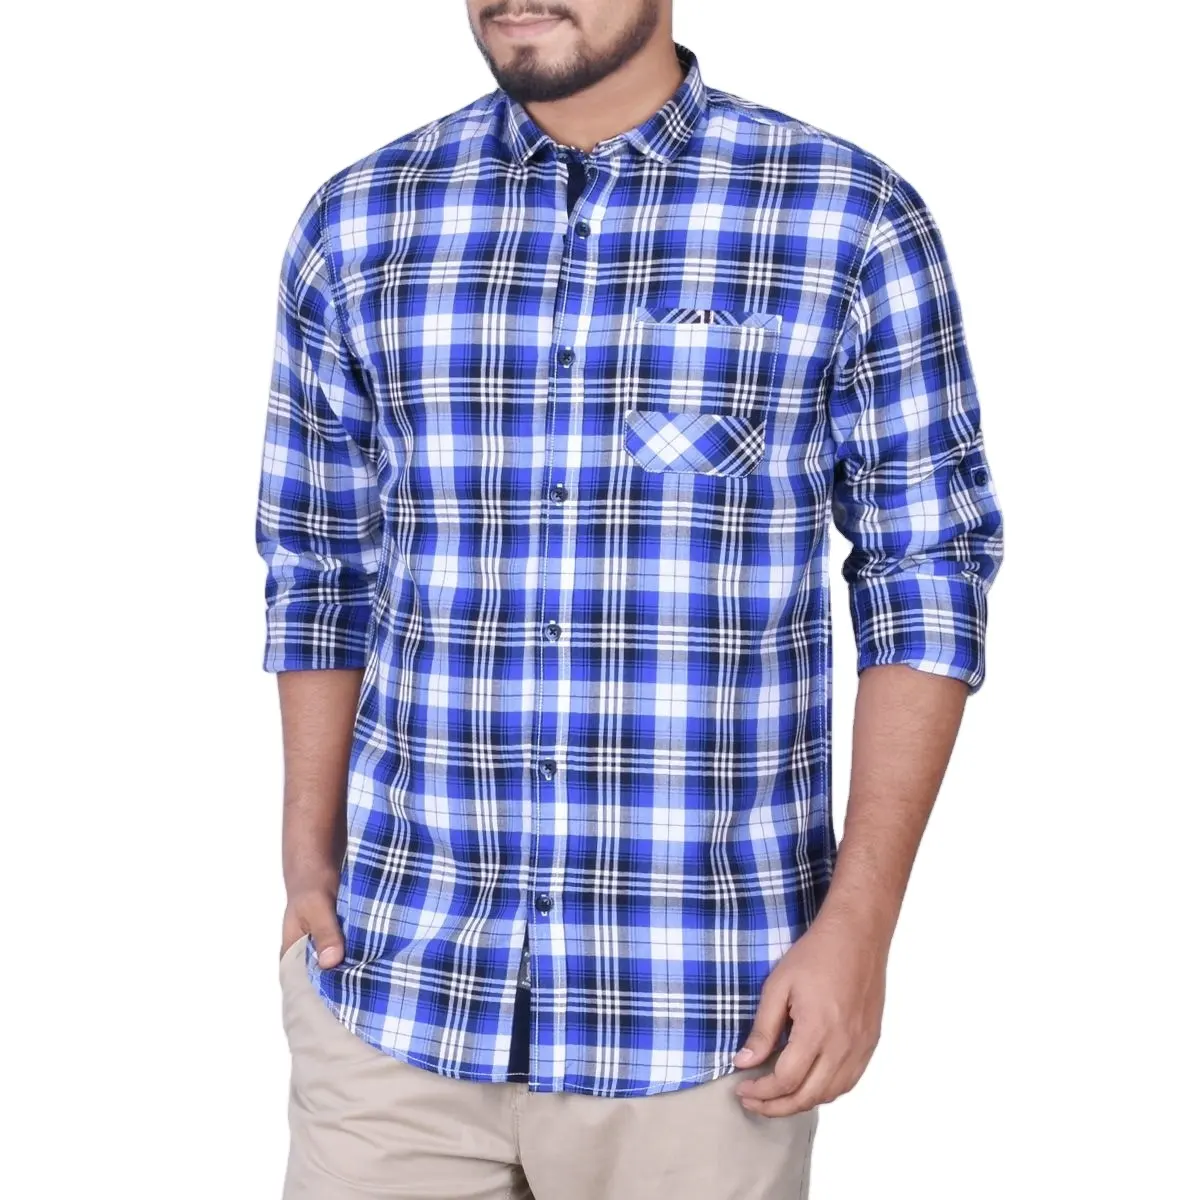 High Quality Best Price Casual Long Sleeve Comfortable Striped Shirt For Men From Bangladesh